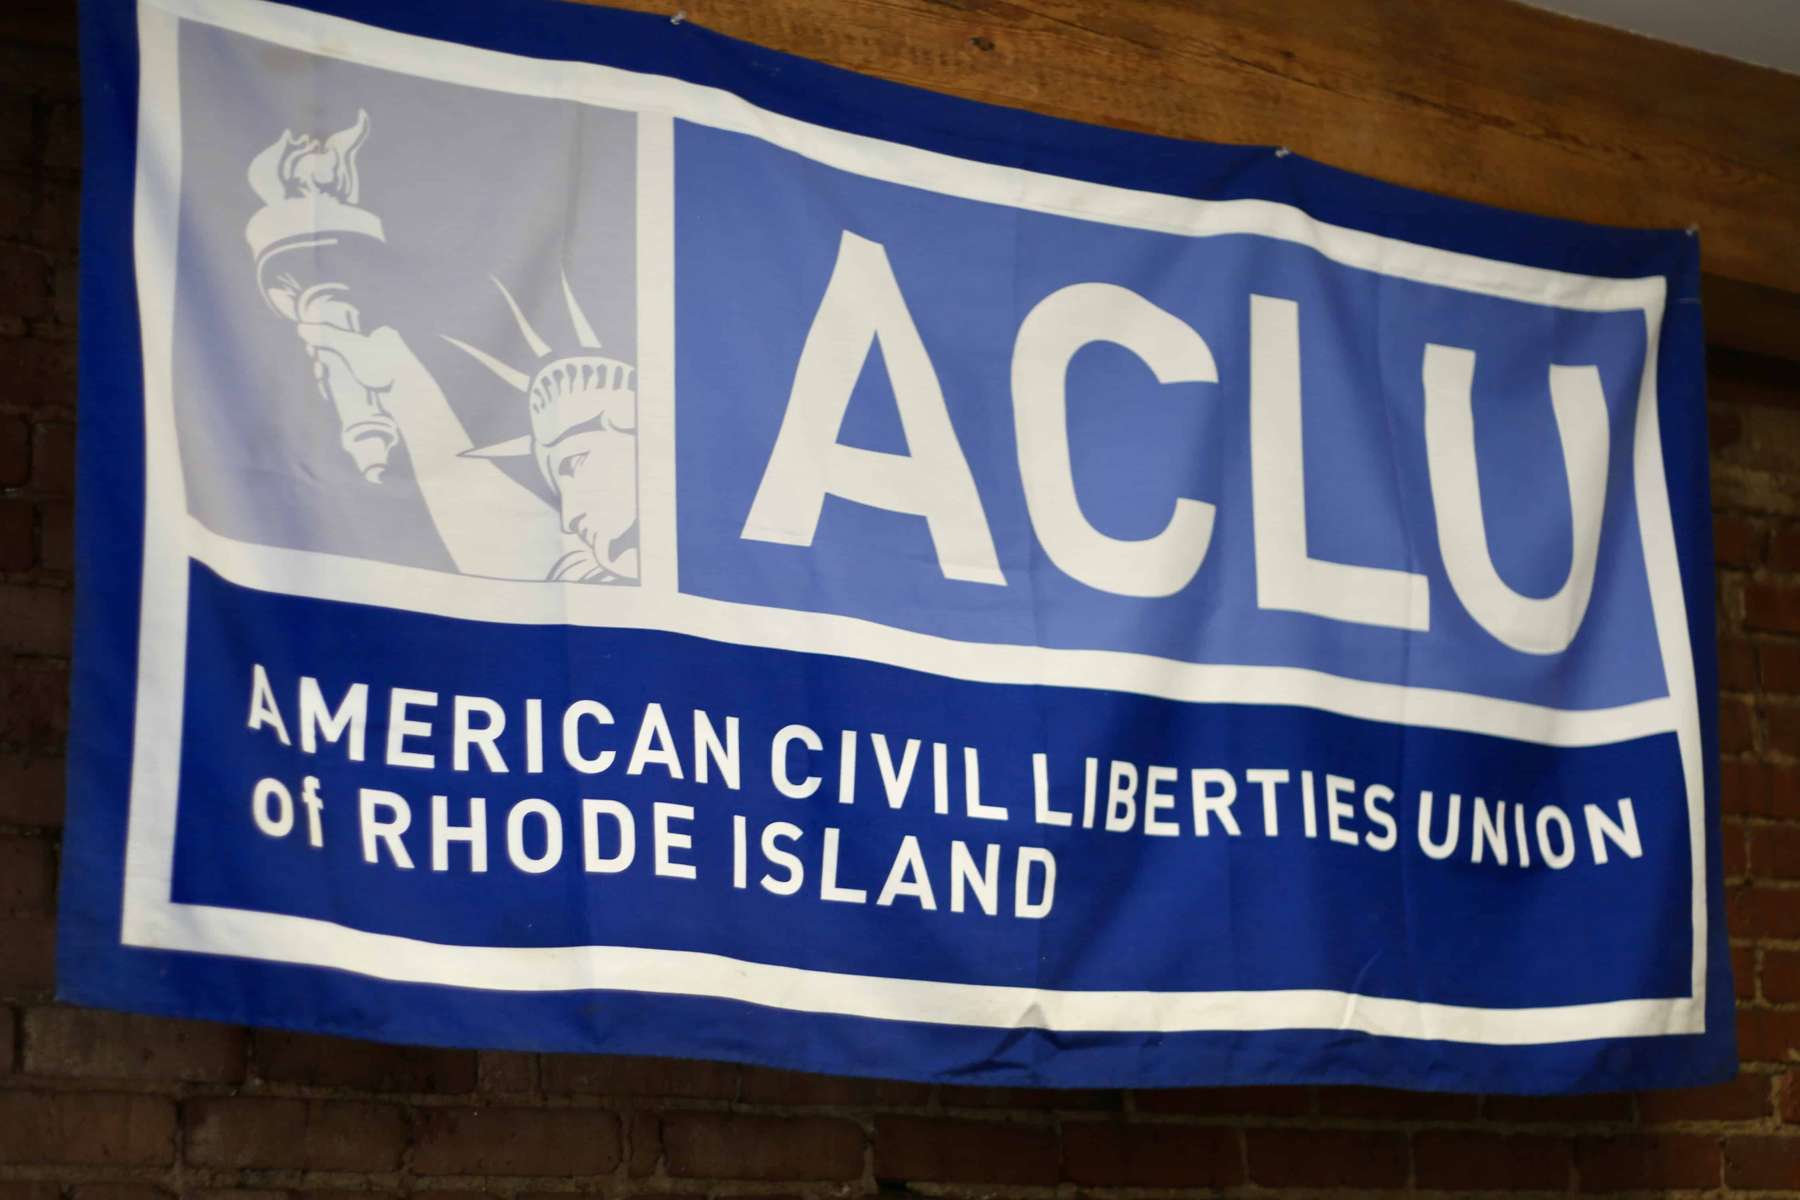 Rhode Island News: ACLU files brief challenging legality of lengthy solitary confinement at the ACI